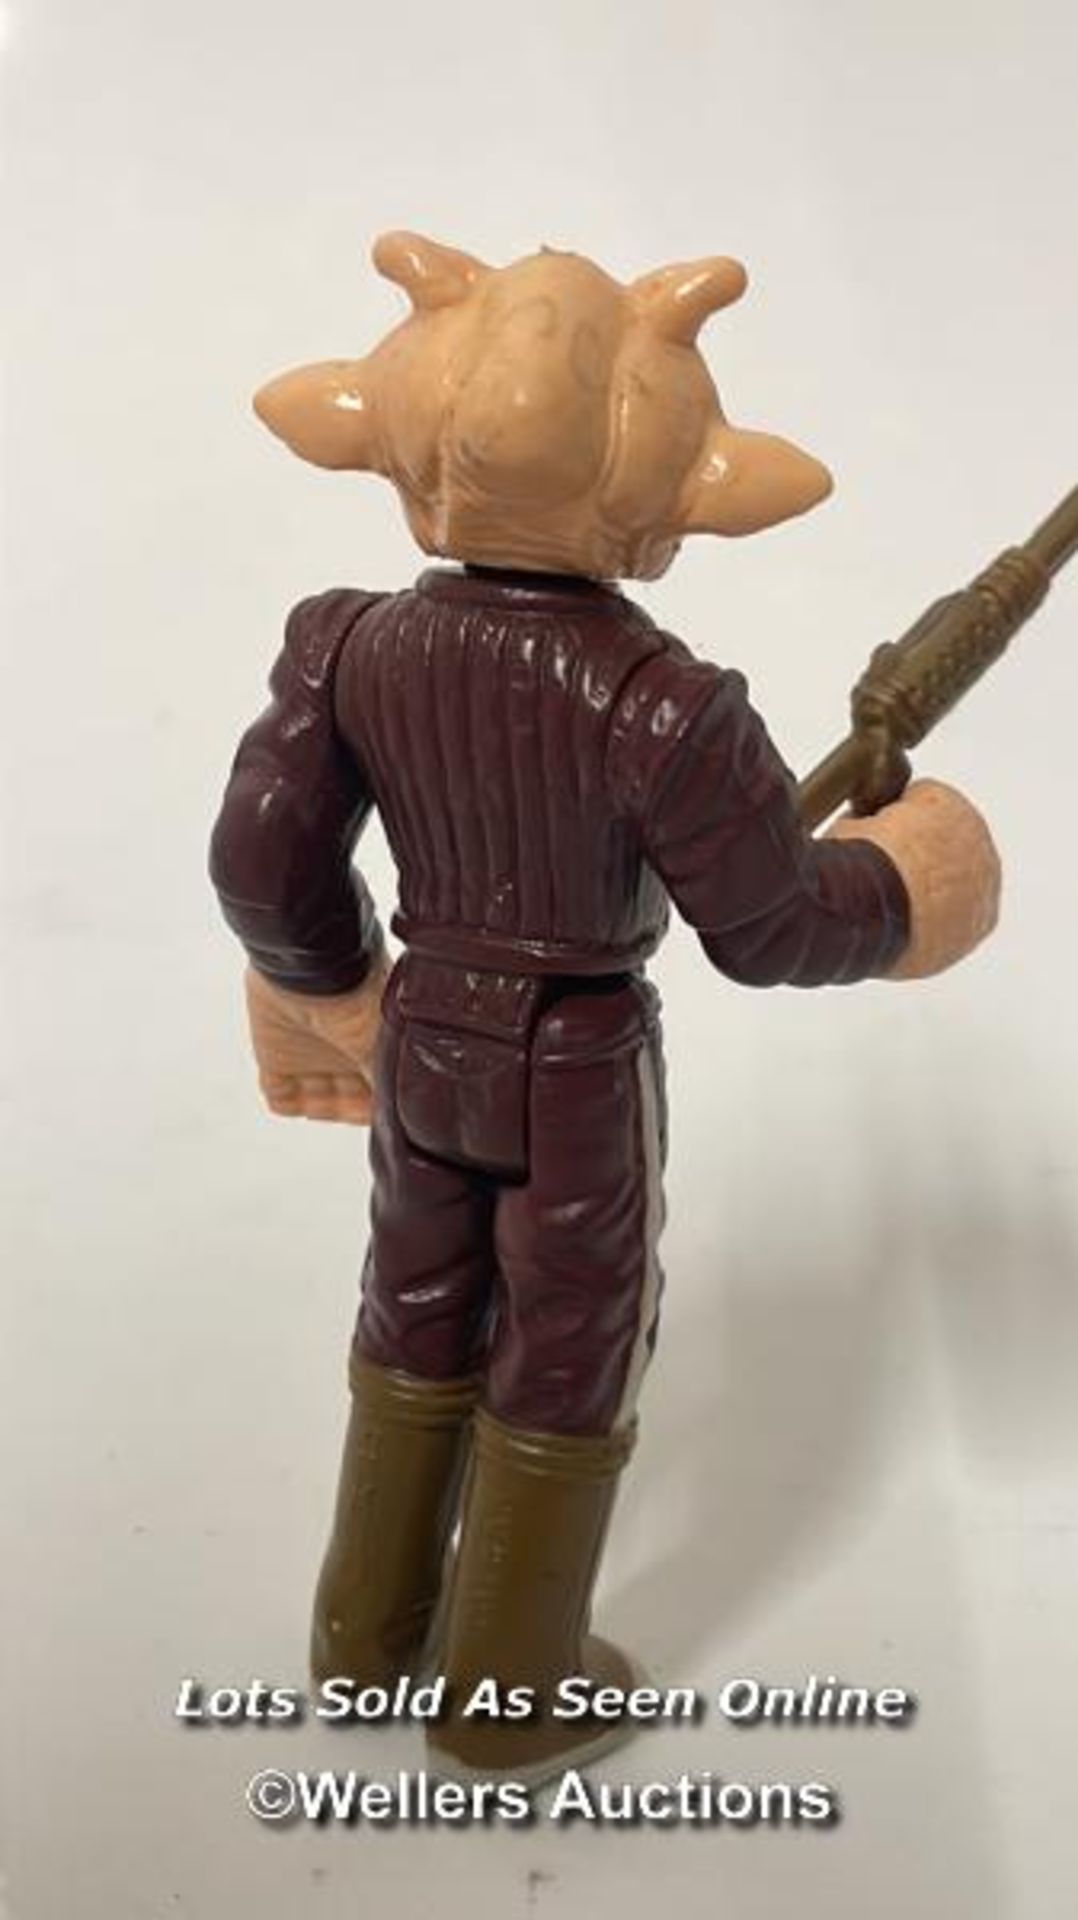 Vintage Star Wars Return of the Jedi lot including Princess Leia - Boushh, LFL 1983 (NO COO) with - Image 8 of 15